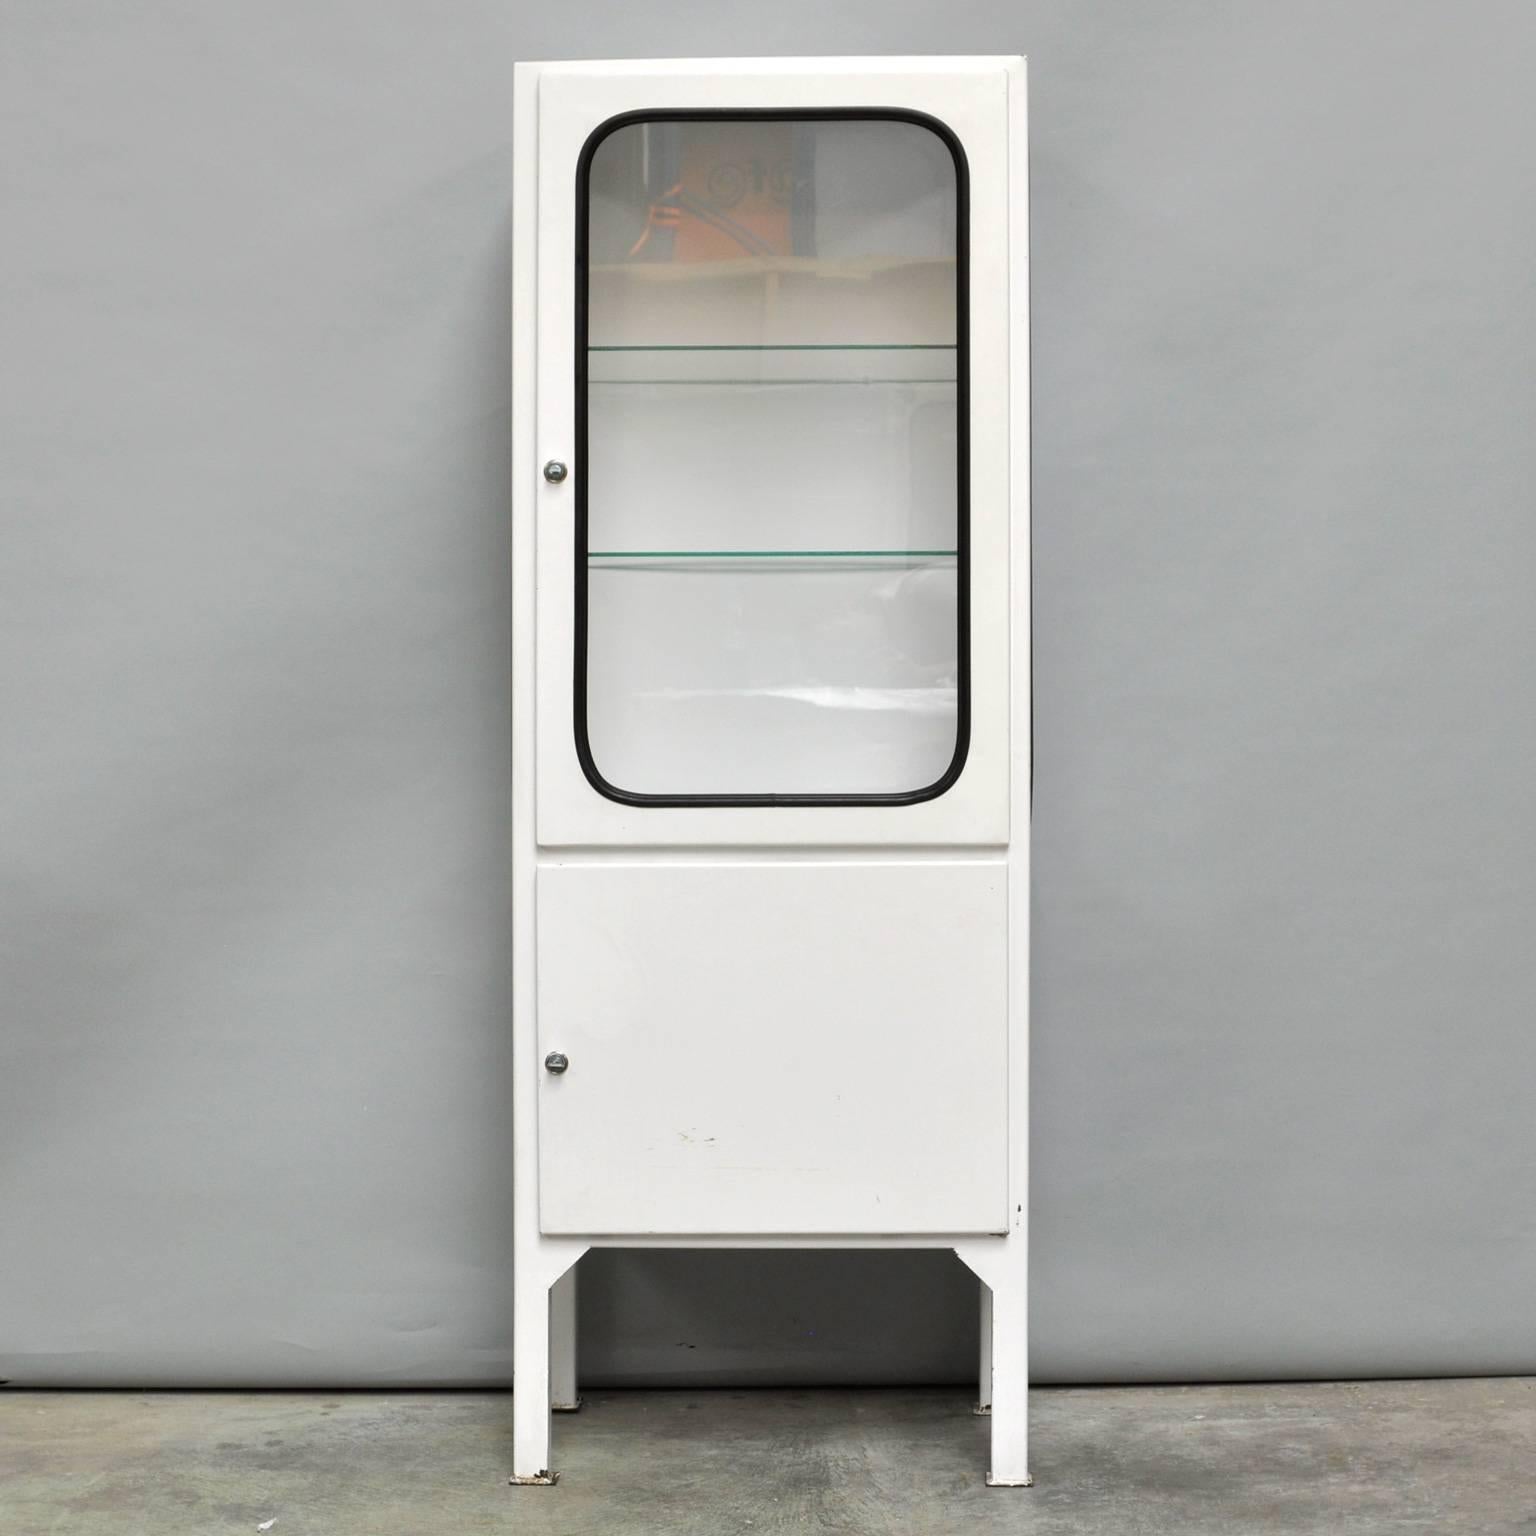 This medicine cabinet was designed in the 1960s and produced in the 1970s in Hungary. It is made of steel and glass and the glass is held by a black rubber strip. The cabinet comes with two adjustable glass shelves and functioning locks. It is in